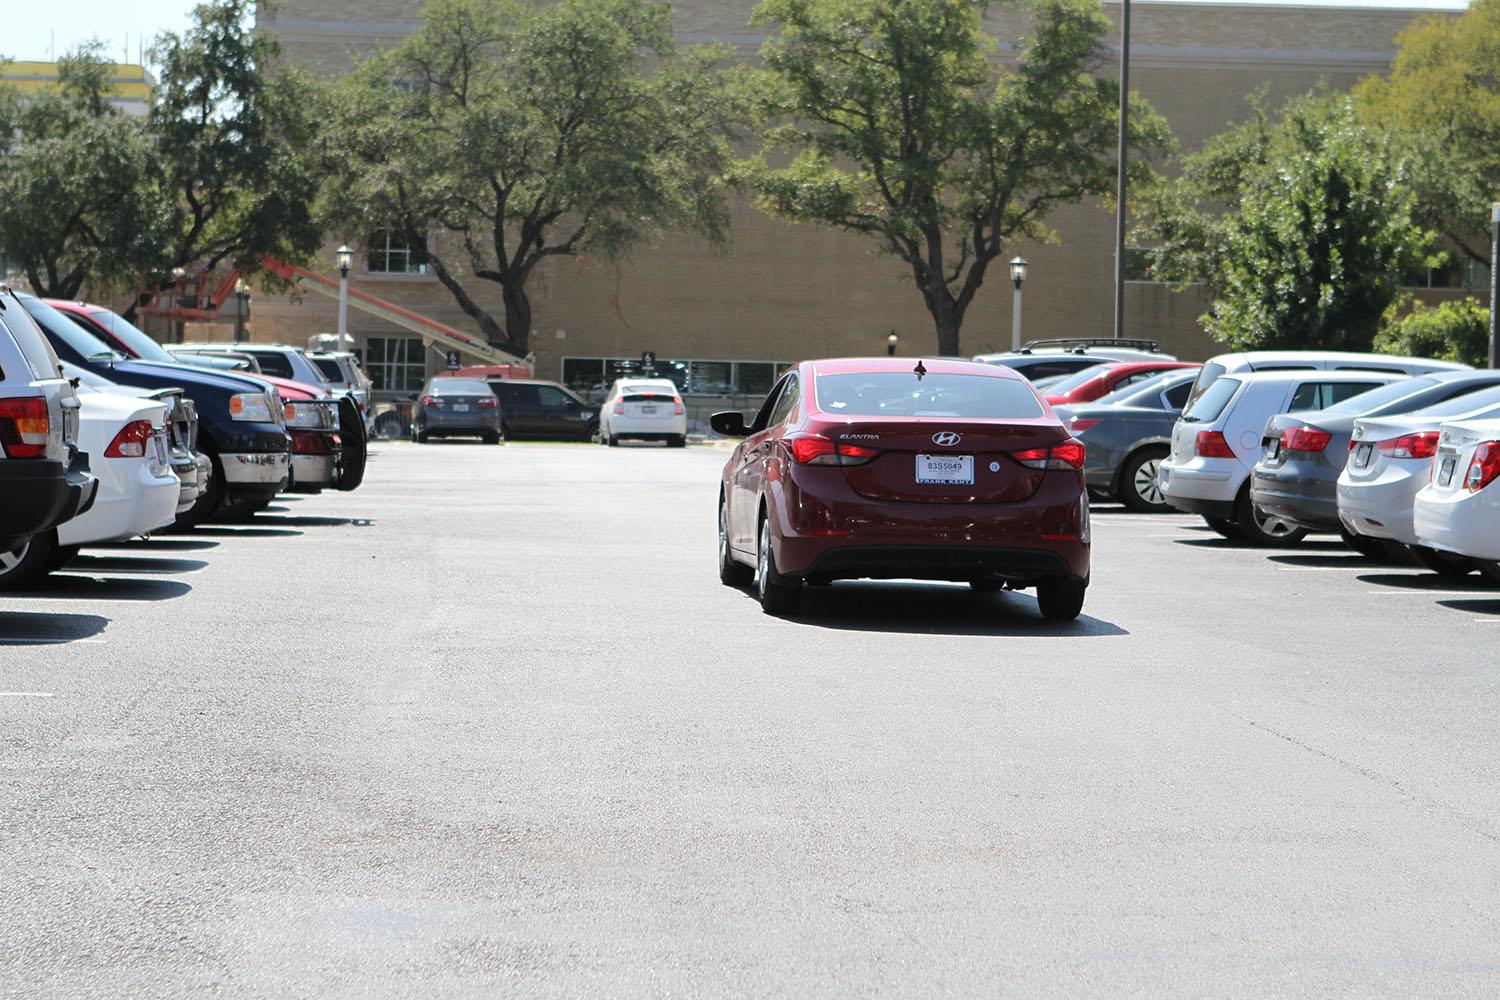 TCU+parking+garages+are+going+up%2C+with+one+open+already%2C+but+students+are+still+having+a+hard+time+find+a+parking+spot.+